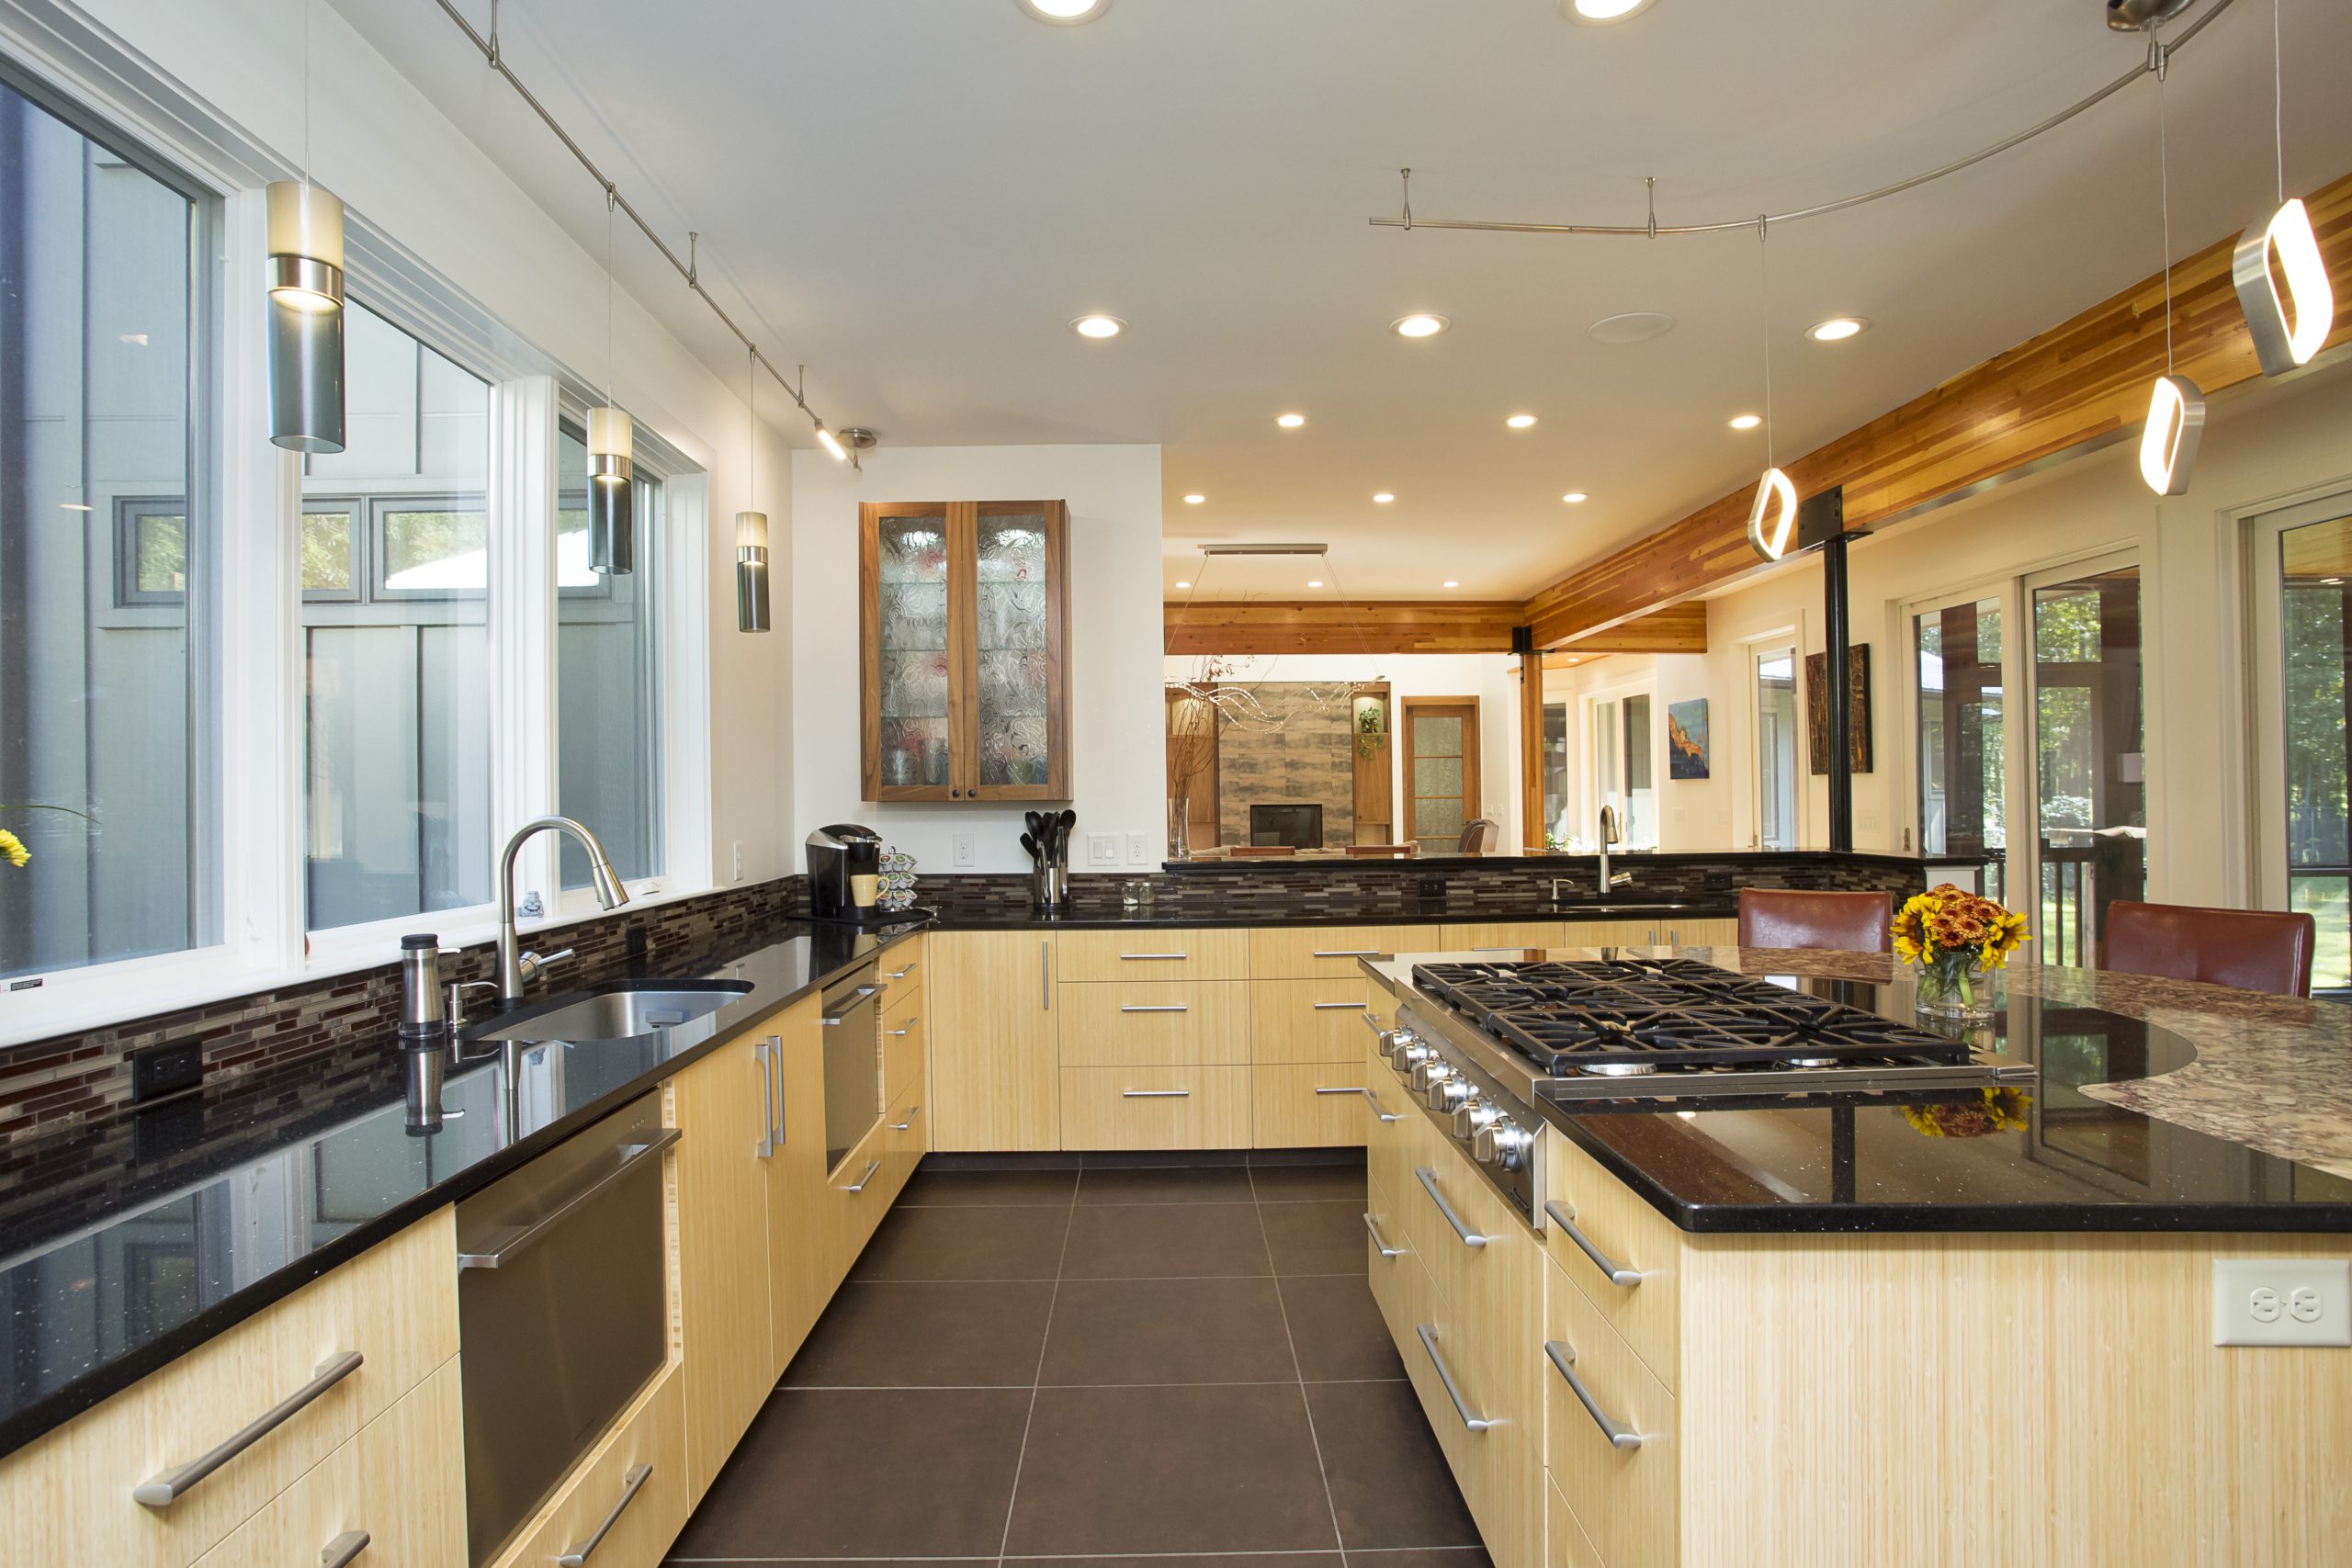 Modern kitchen with dark countertops and light wood outset cabinets